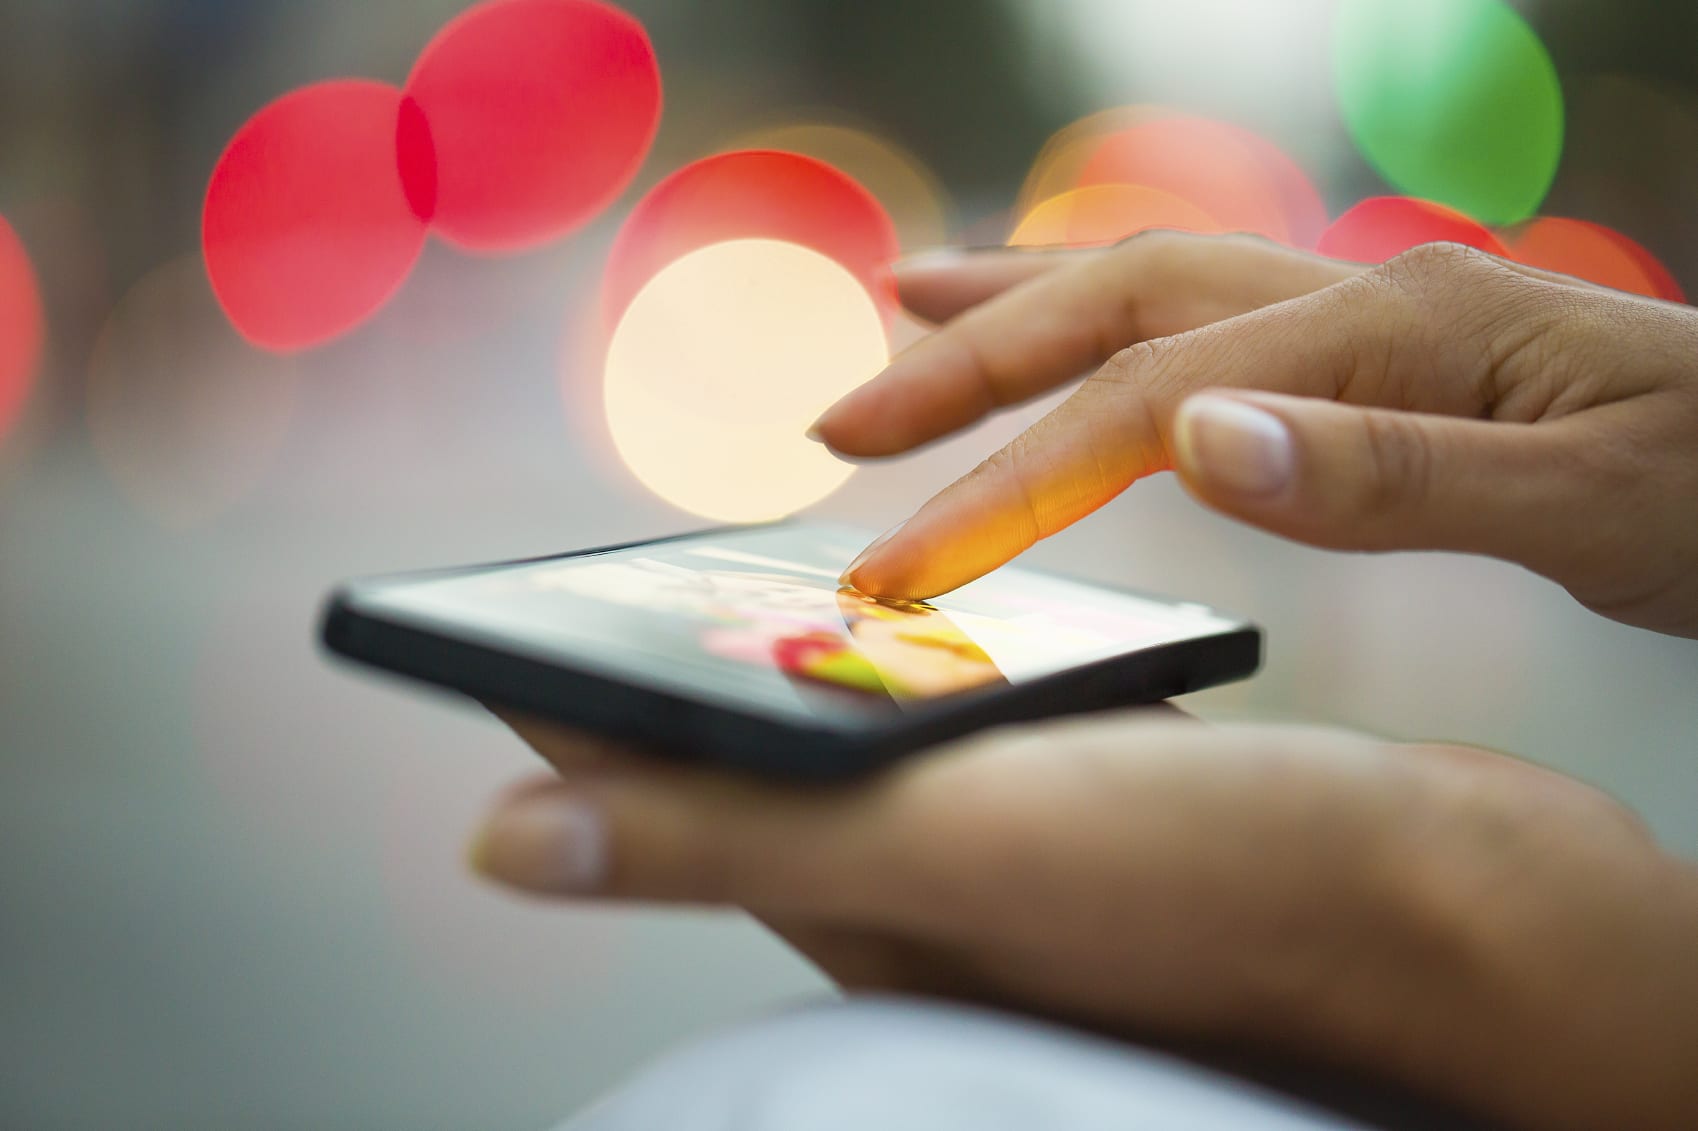 4 Ways to Make Your Small Business More Mobile